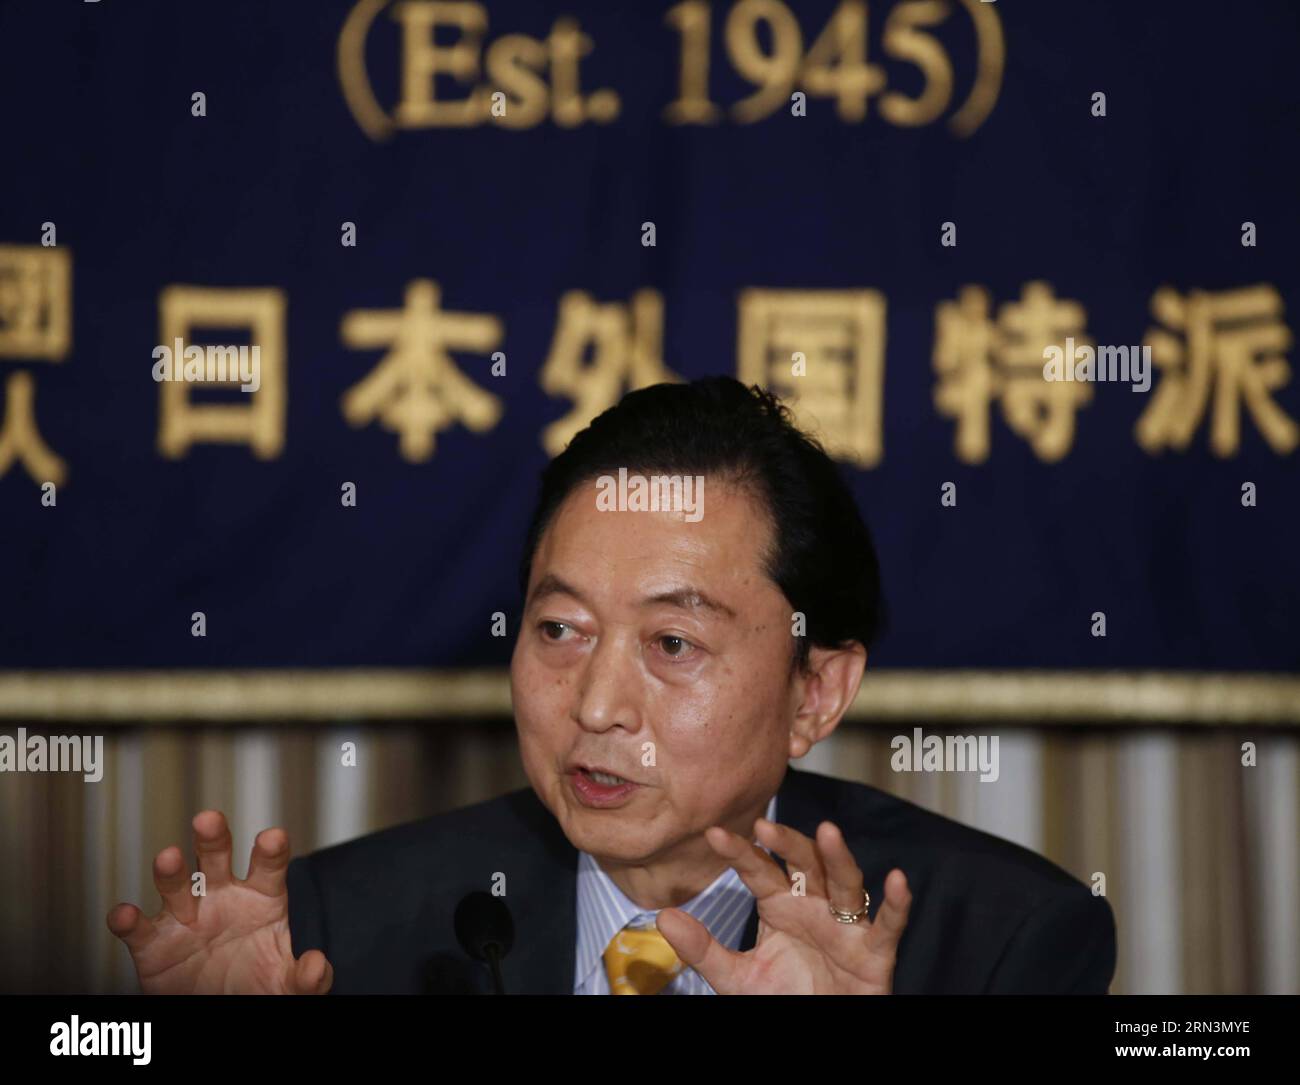 (150422) -- TOKYO, April 22, 2015 -- Former Japanese Prime Minister Yukio Hatoyama speaks during a press conference in Tokyo, Japan, April 22, 2015. Hatoyama called on Prime Minister Shinzo Abe to follow the Murayama Statement and to include the key words in his war anniversary statement, adding that he has considerable anxieties that Abe s statement may increase tensions among peoples of the Asian region. ) JAPAN-TOKYO-POLITICS-YUKIO HATOYAMA-PRESS CONFERENCE Stringer PUBLICATIONxNOTxINxCHN   Tokyo April 22 2015 Former Japanese Prime Ministers Yukio Hatoyama Speaks during a Press Conference i Stock Photo